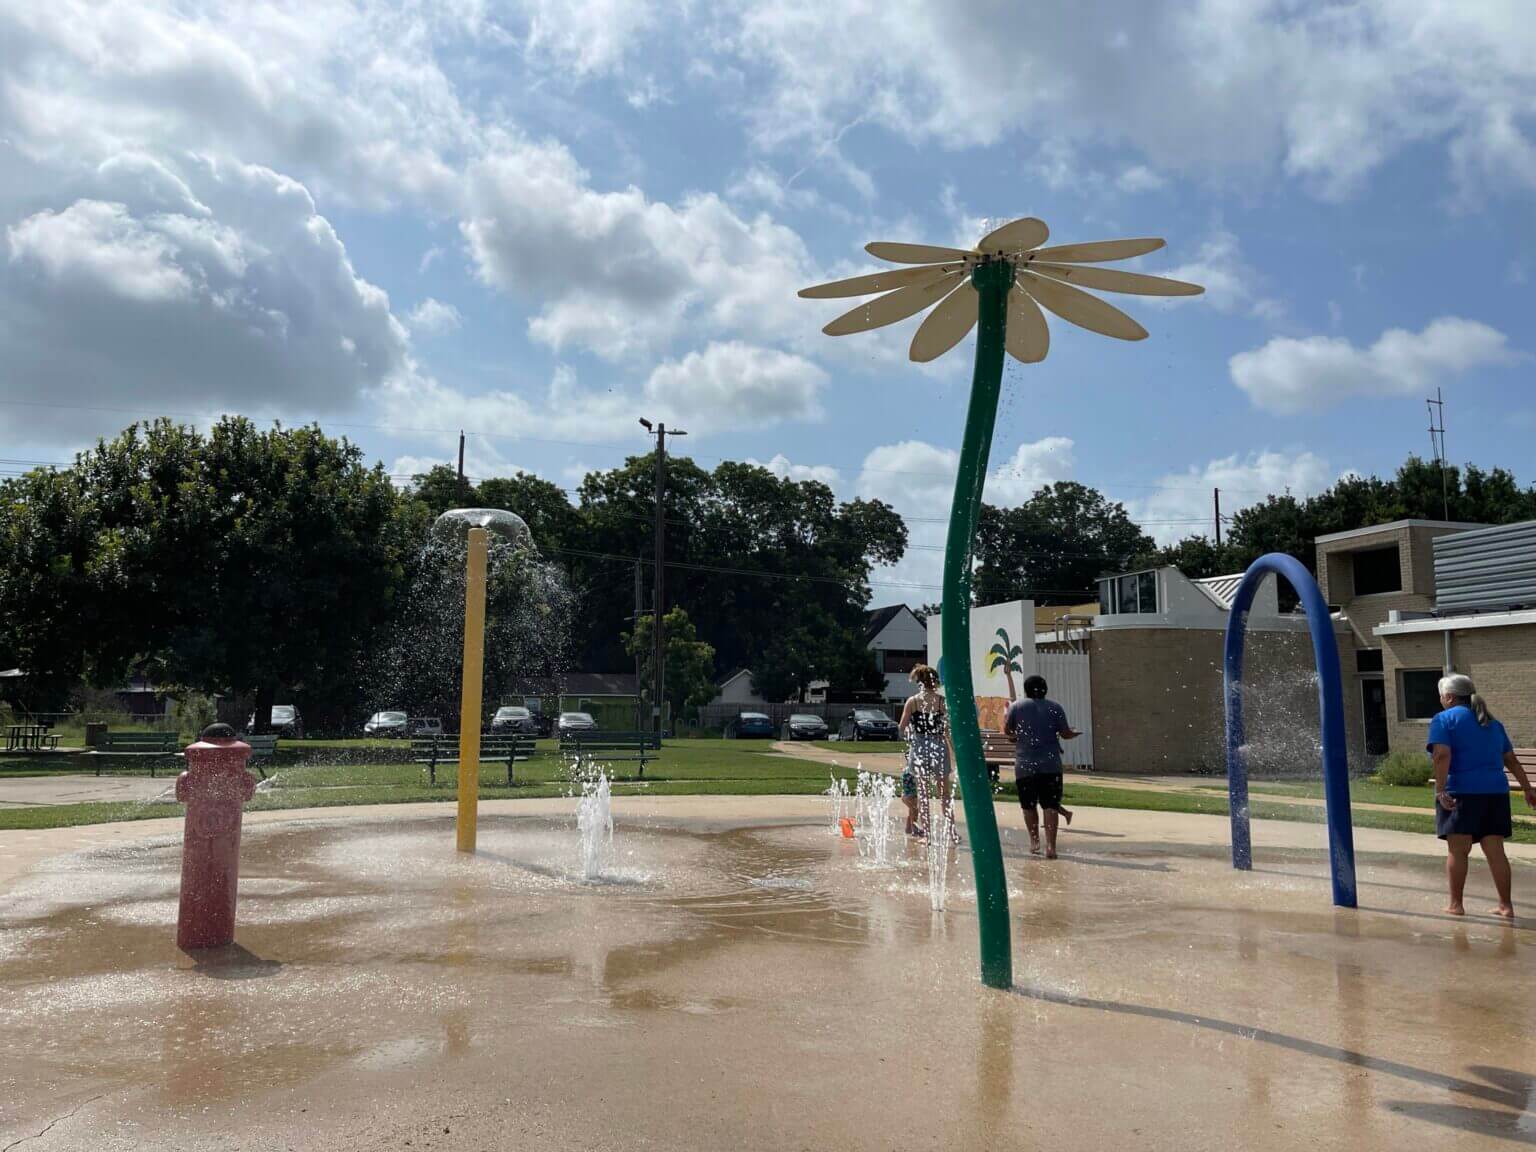 What are the hours for free splash pads in Austin TX